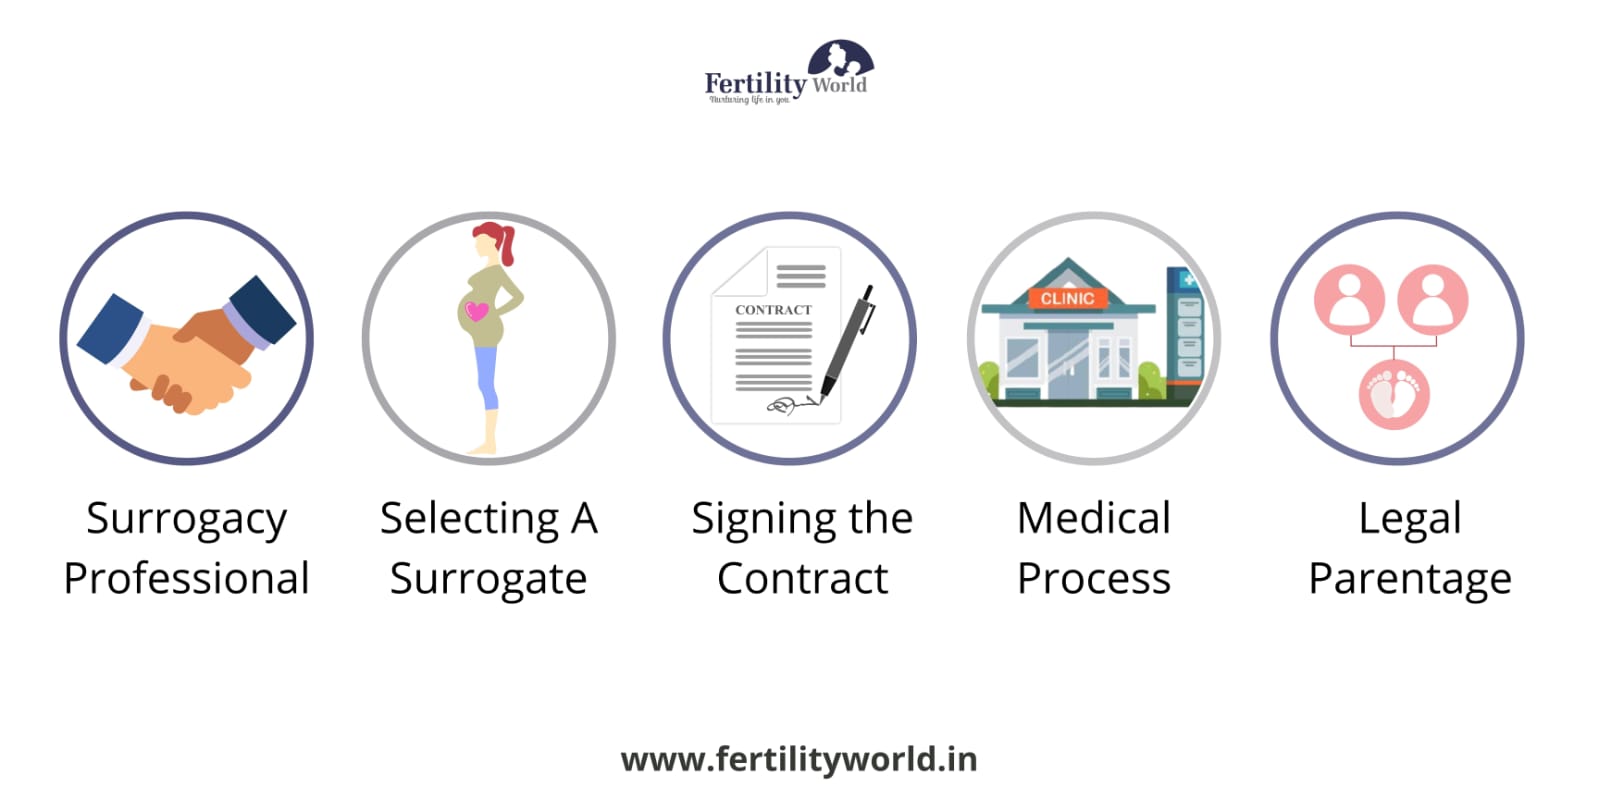 Surrogacy process at the Fertility World in Chandigarh